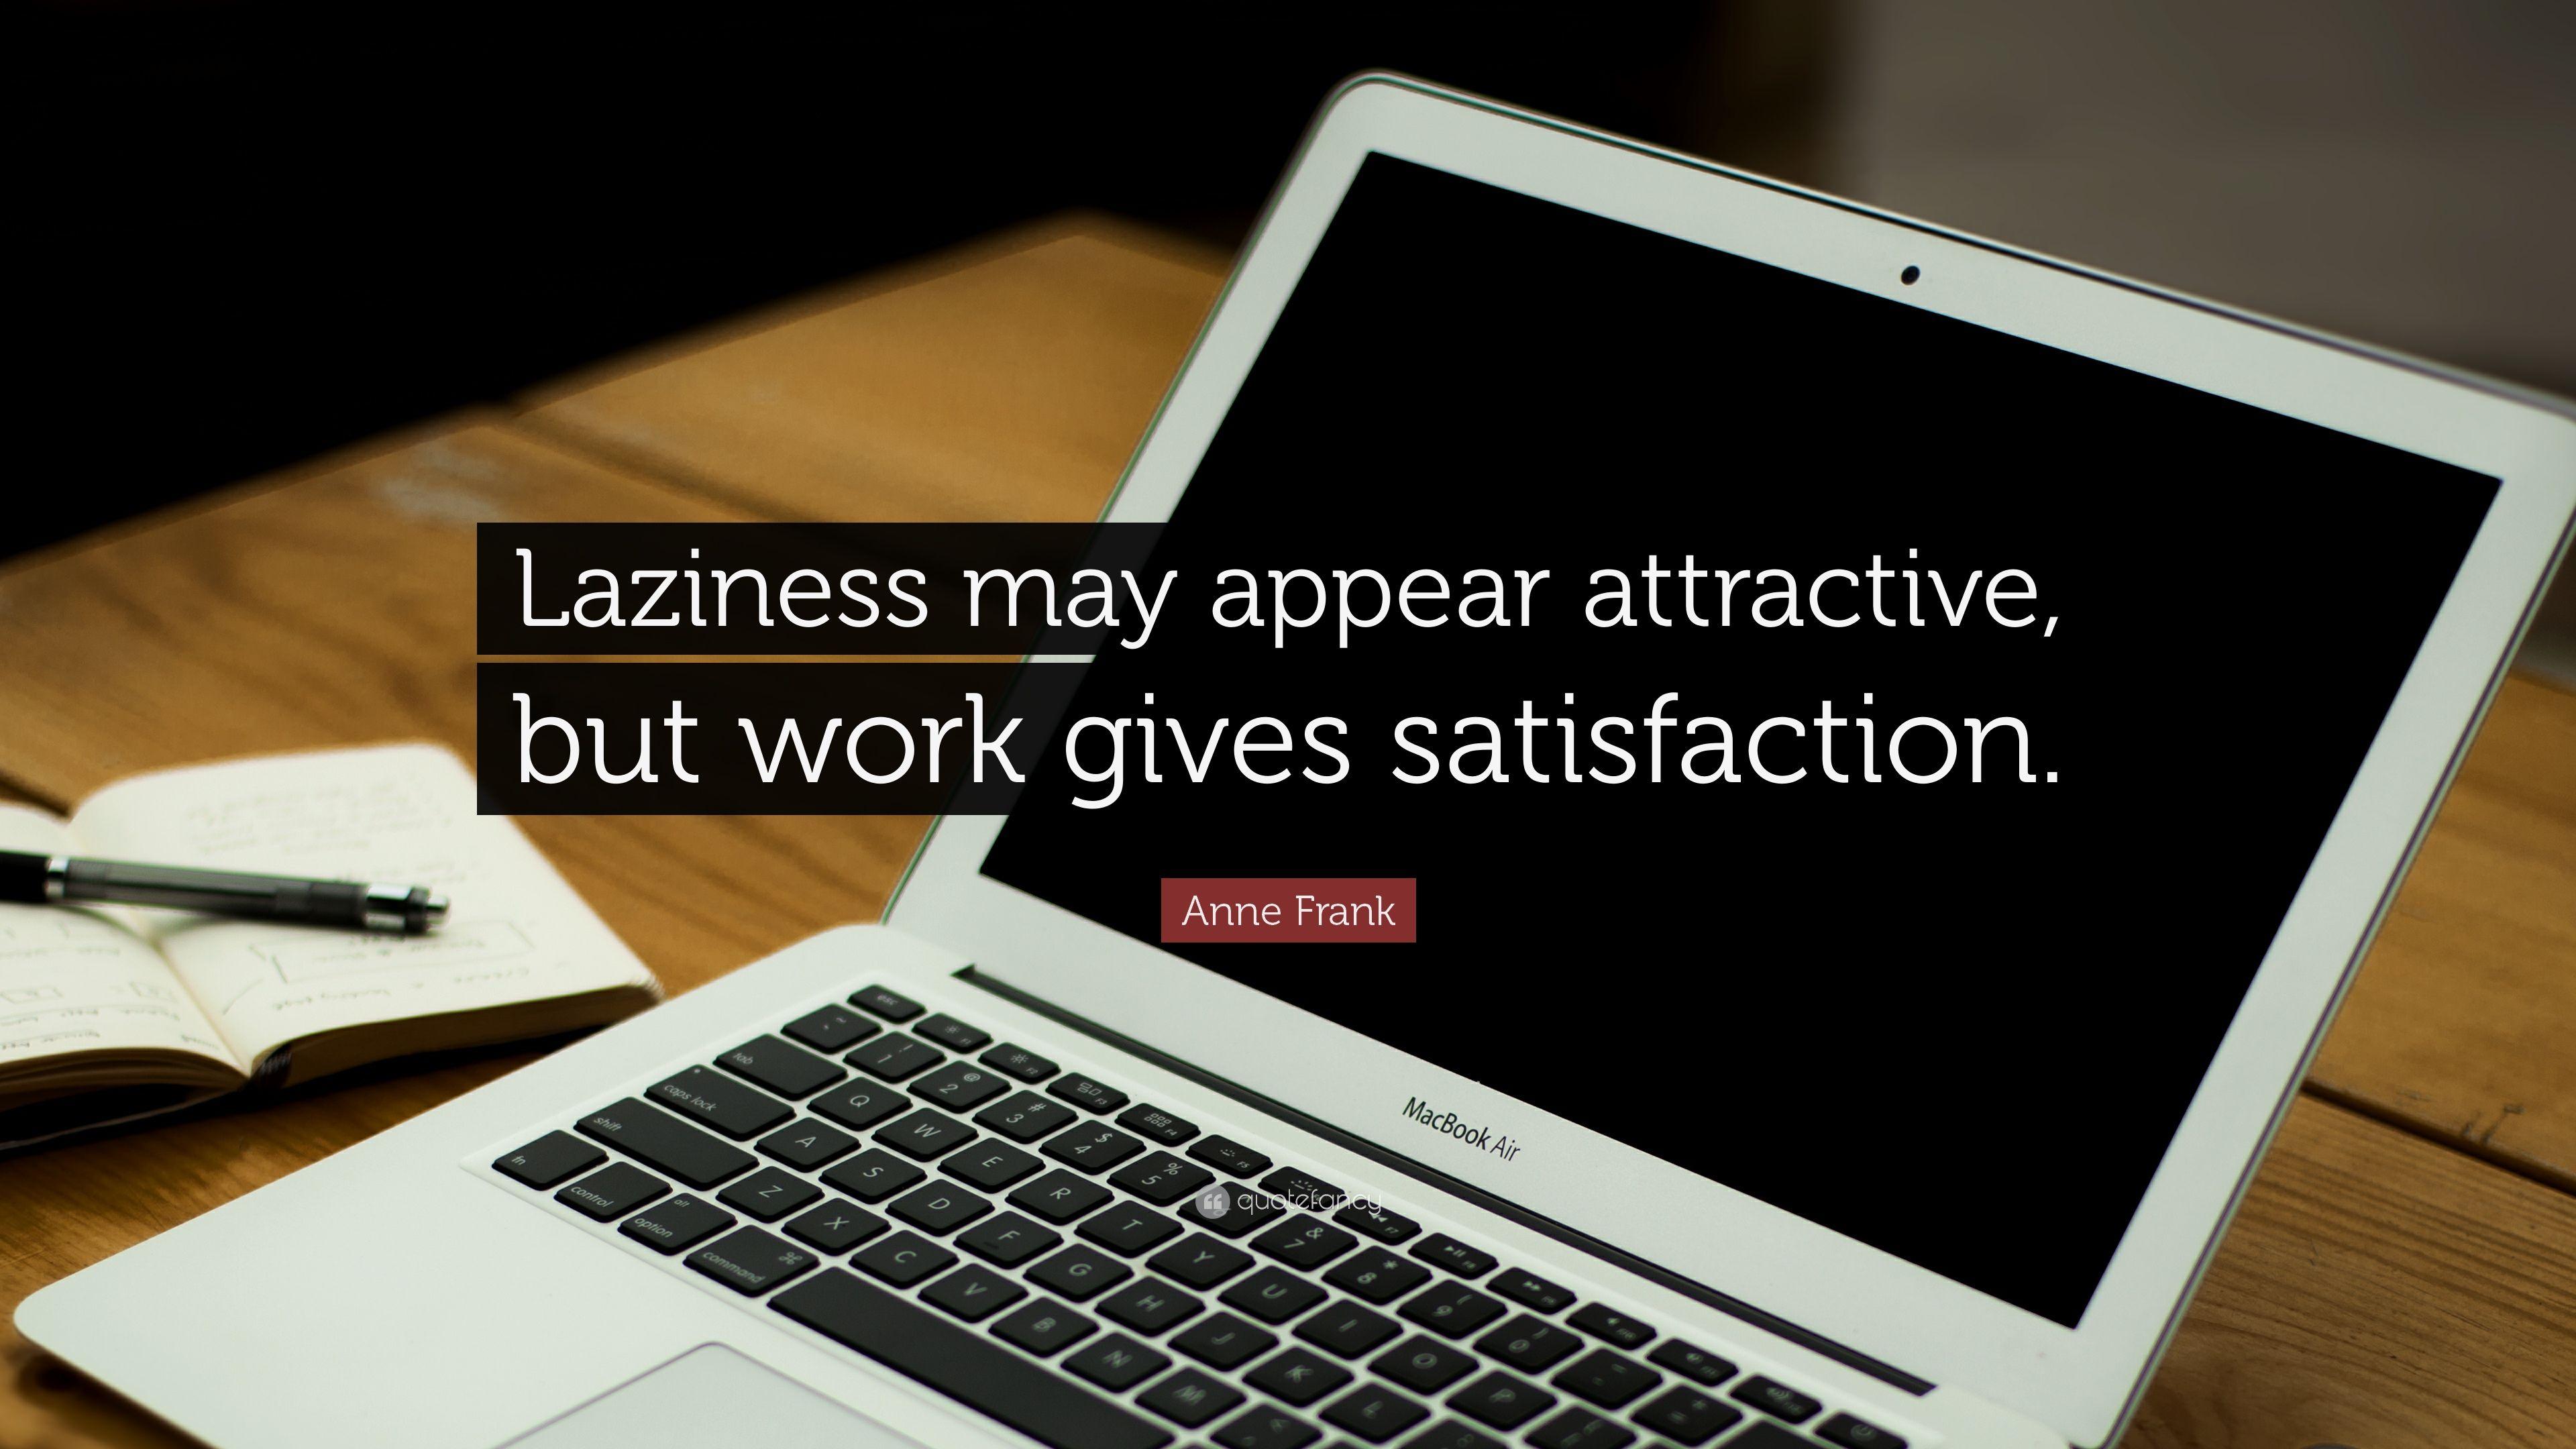 Anne Frank Quote: “Laziness may appear attractive, but work gives